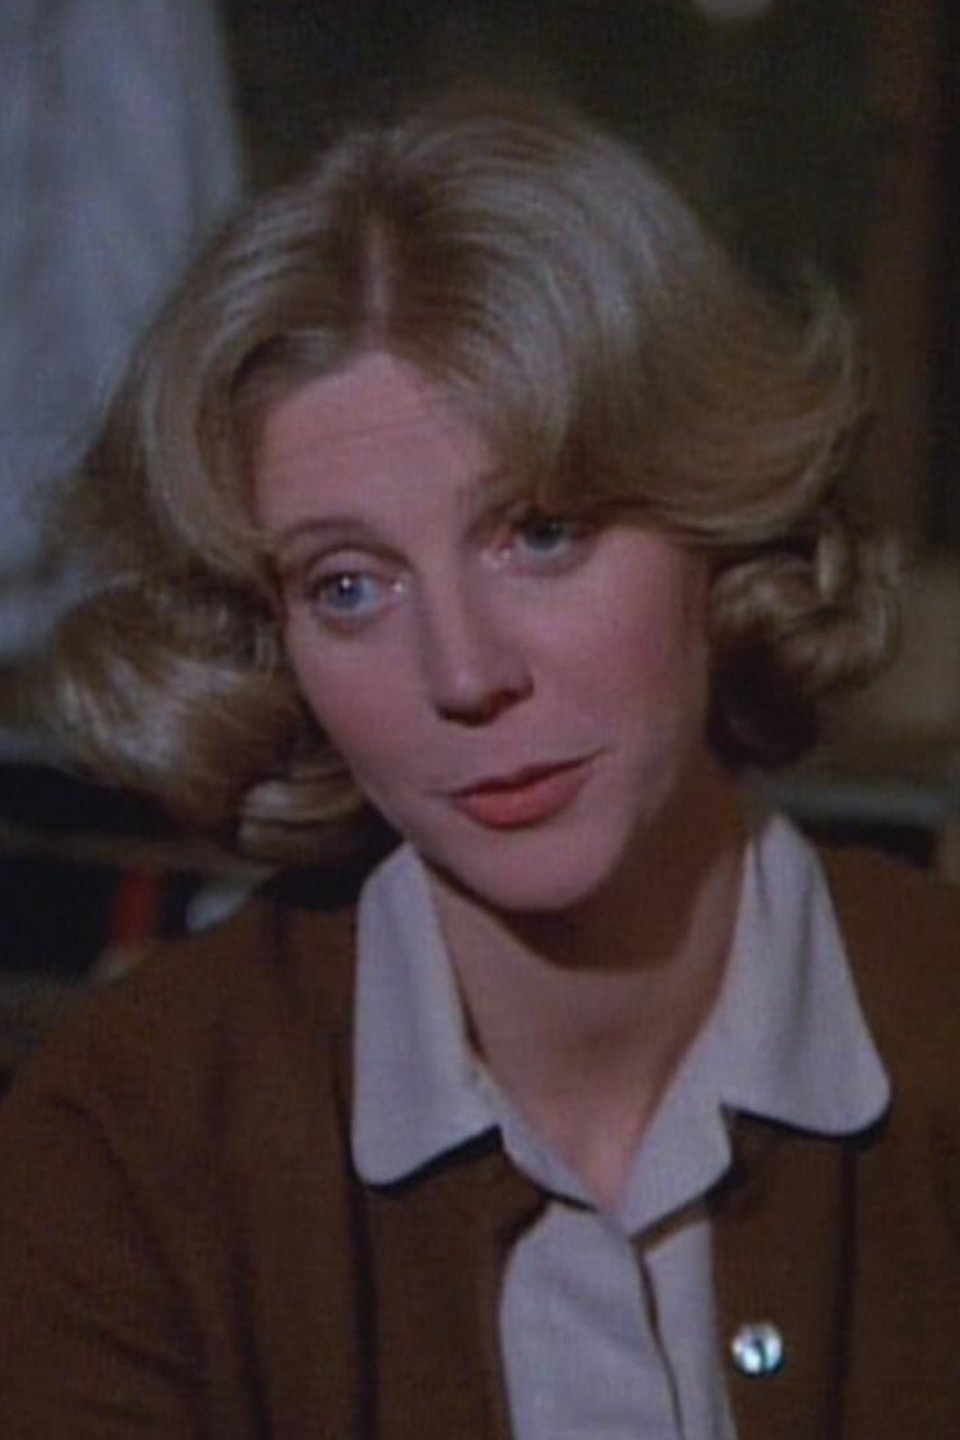 Blythe danner young pictures